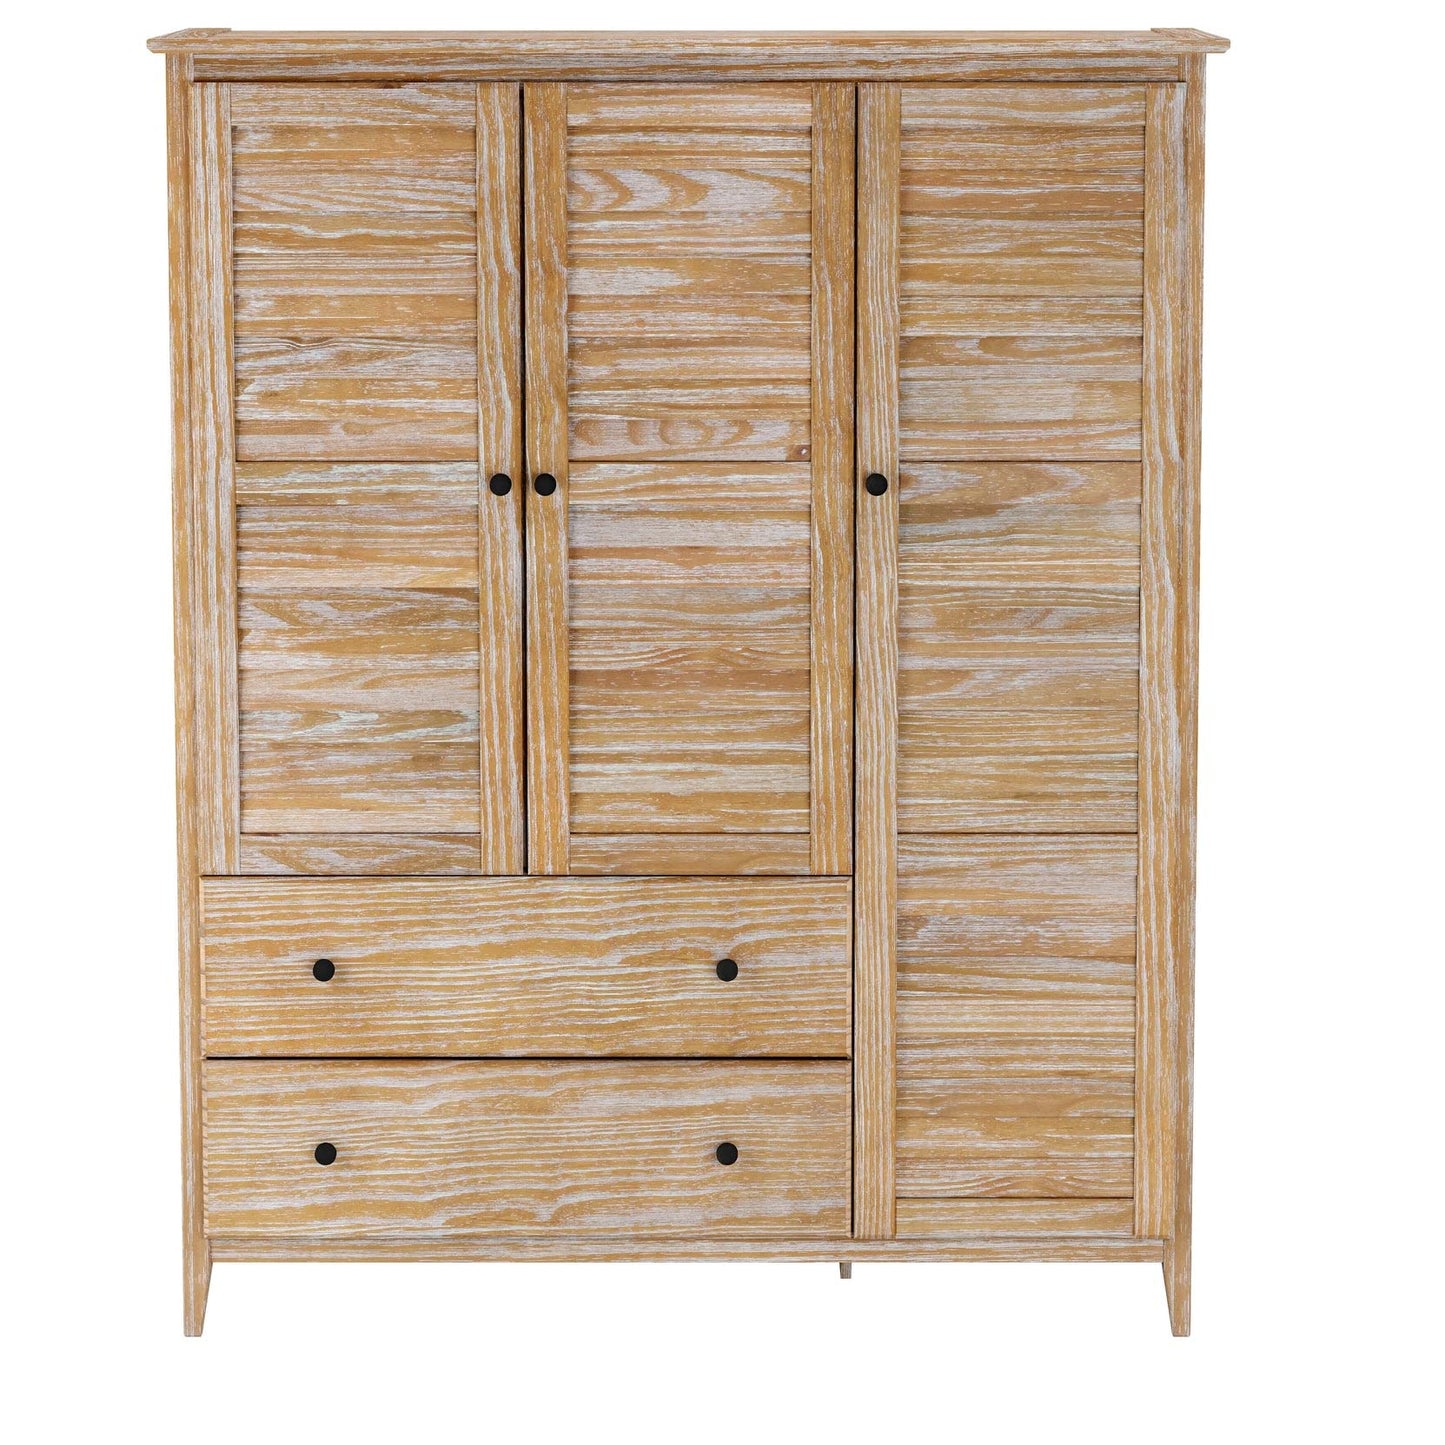 Grain Wood Furniture Greenport 3-Door Wardrobe, Solid Wood with Brushed Driftwood Finish